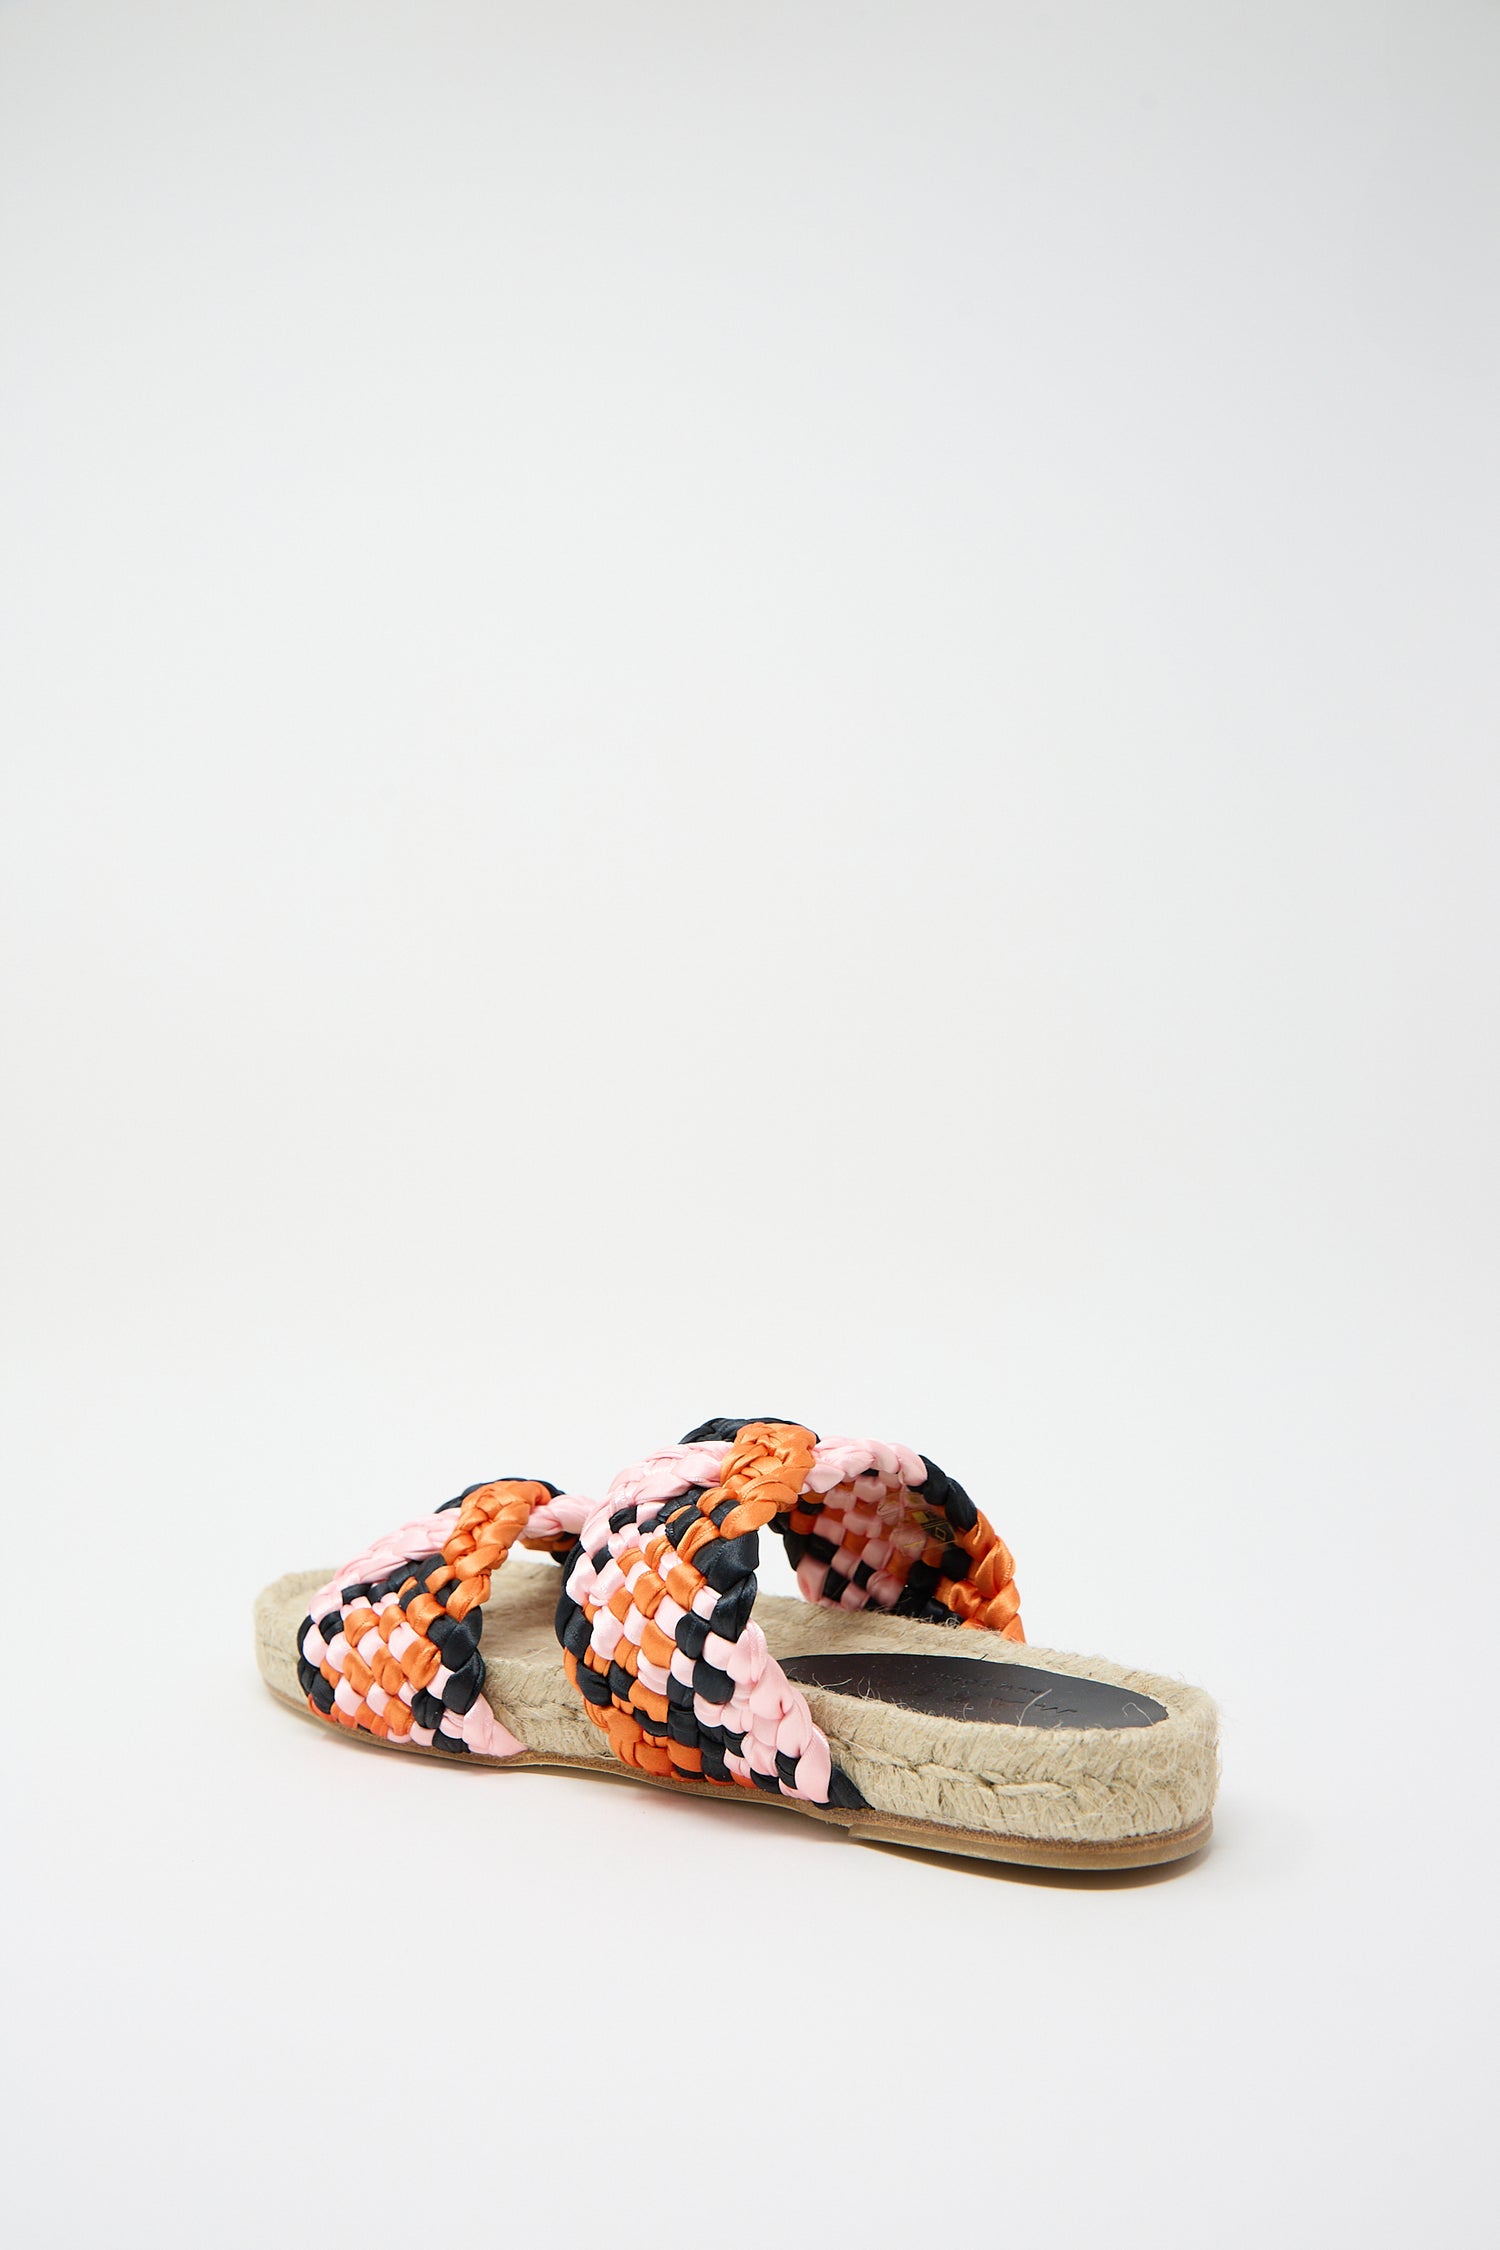 A pair of colorful handmade Marea Braided Satin Espadrille sandals with a white sole, displayed against a plain, light background.